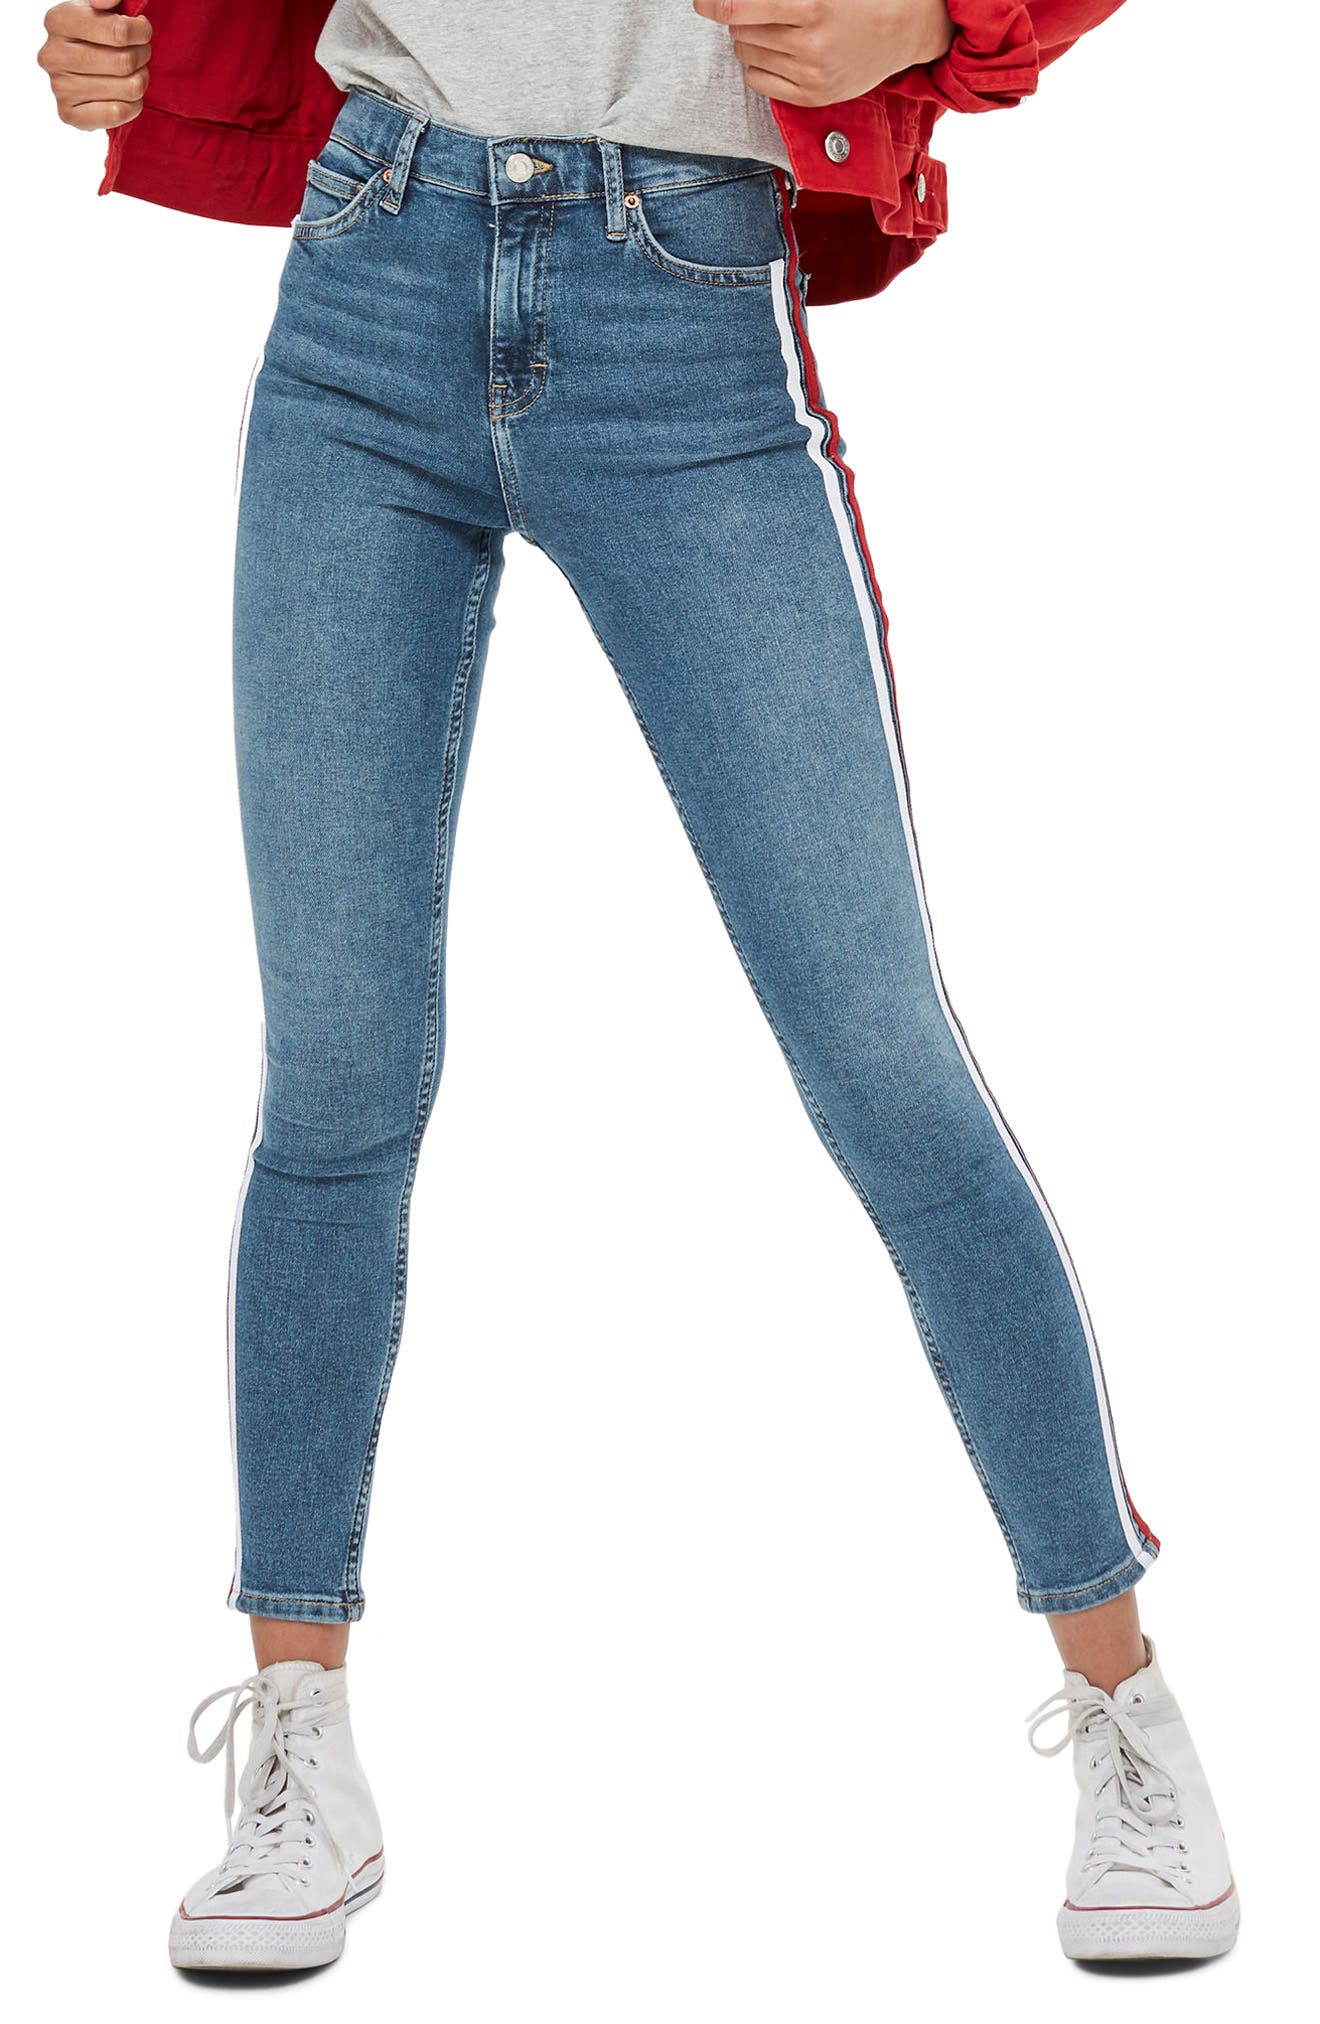 blue jeans with stripe down the side